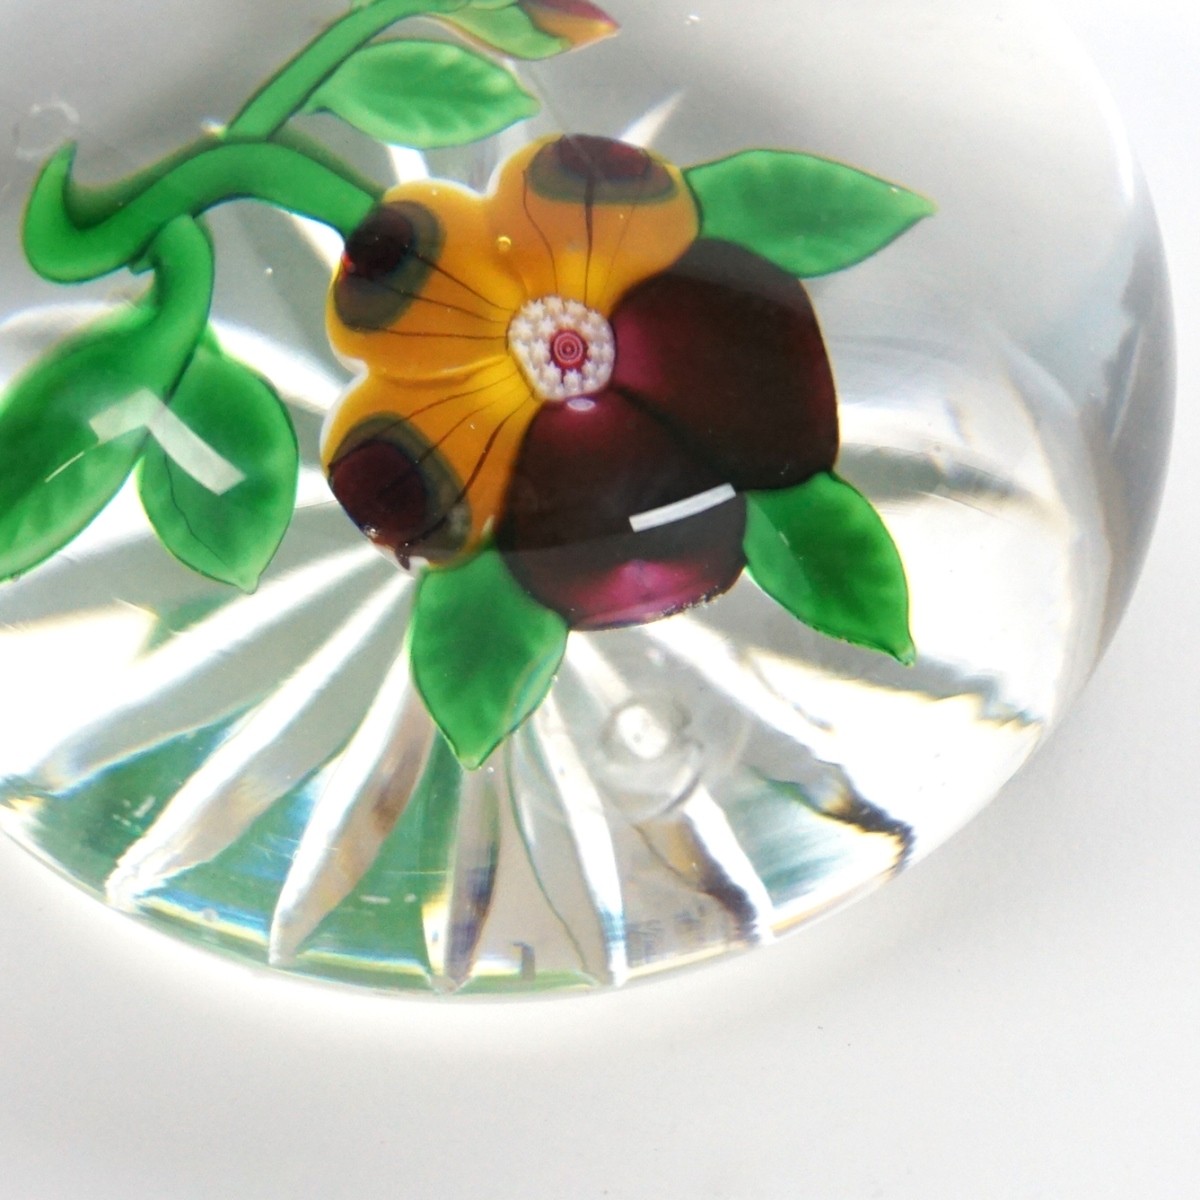 Baccarat Paperweight Pansy